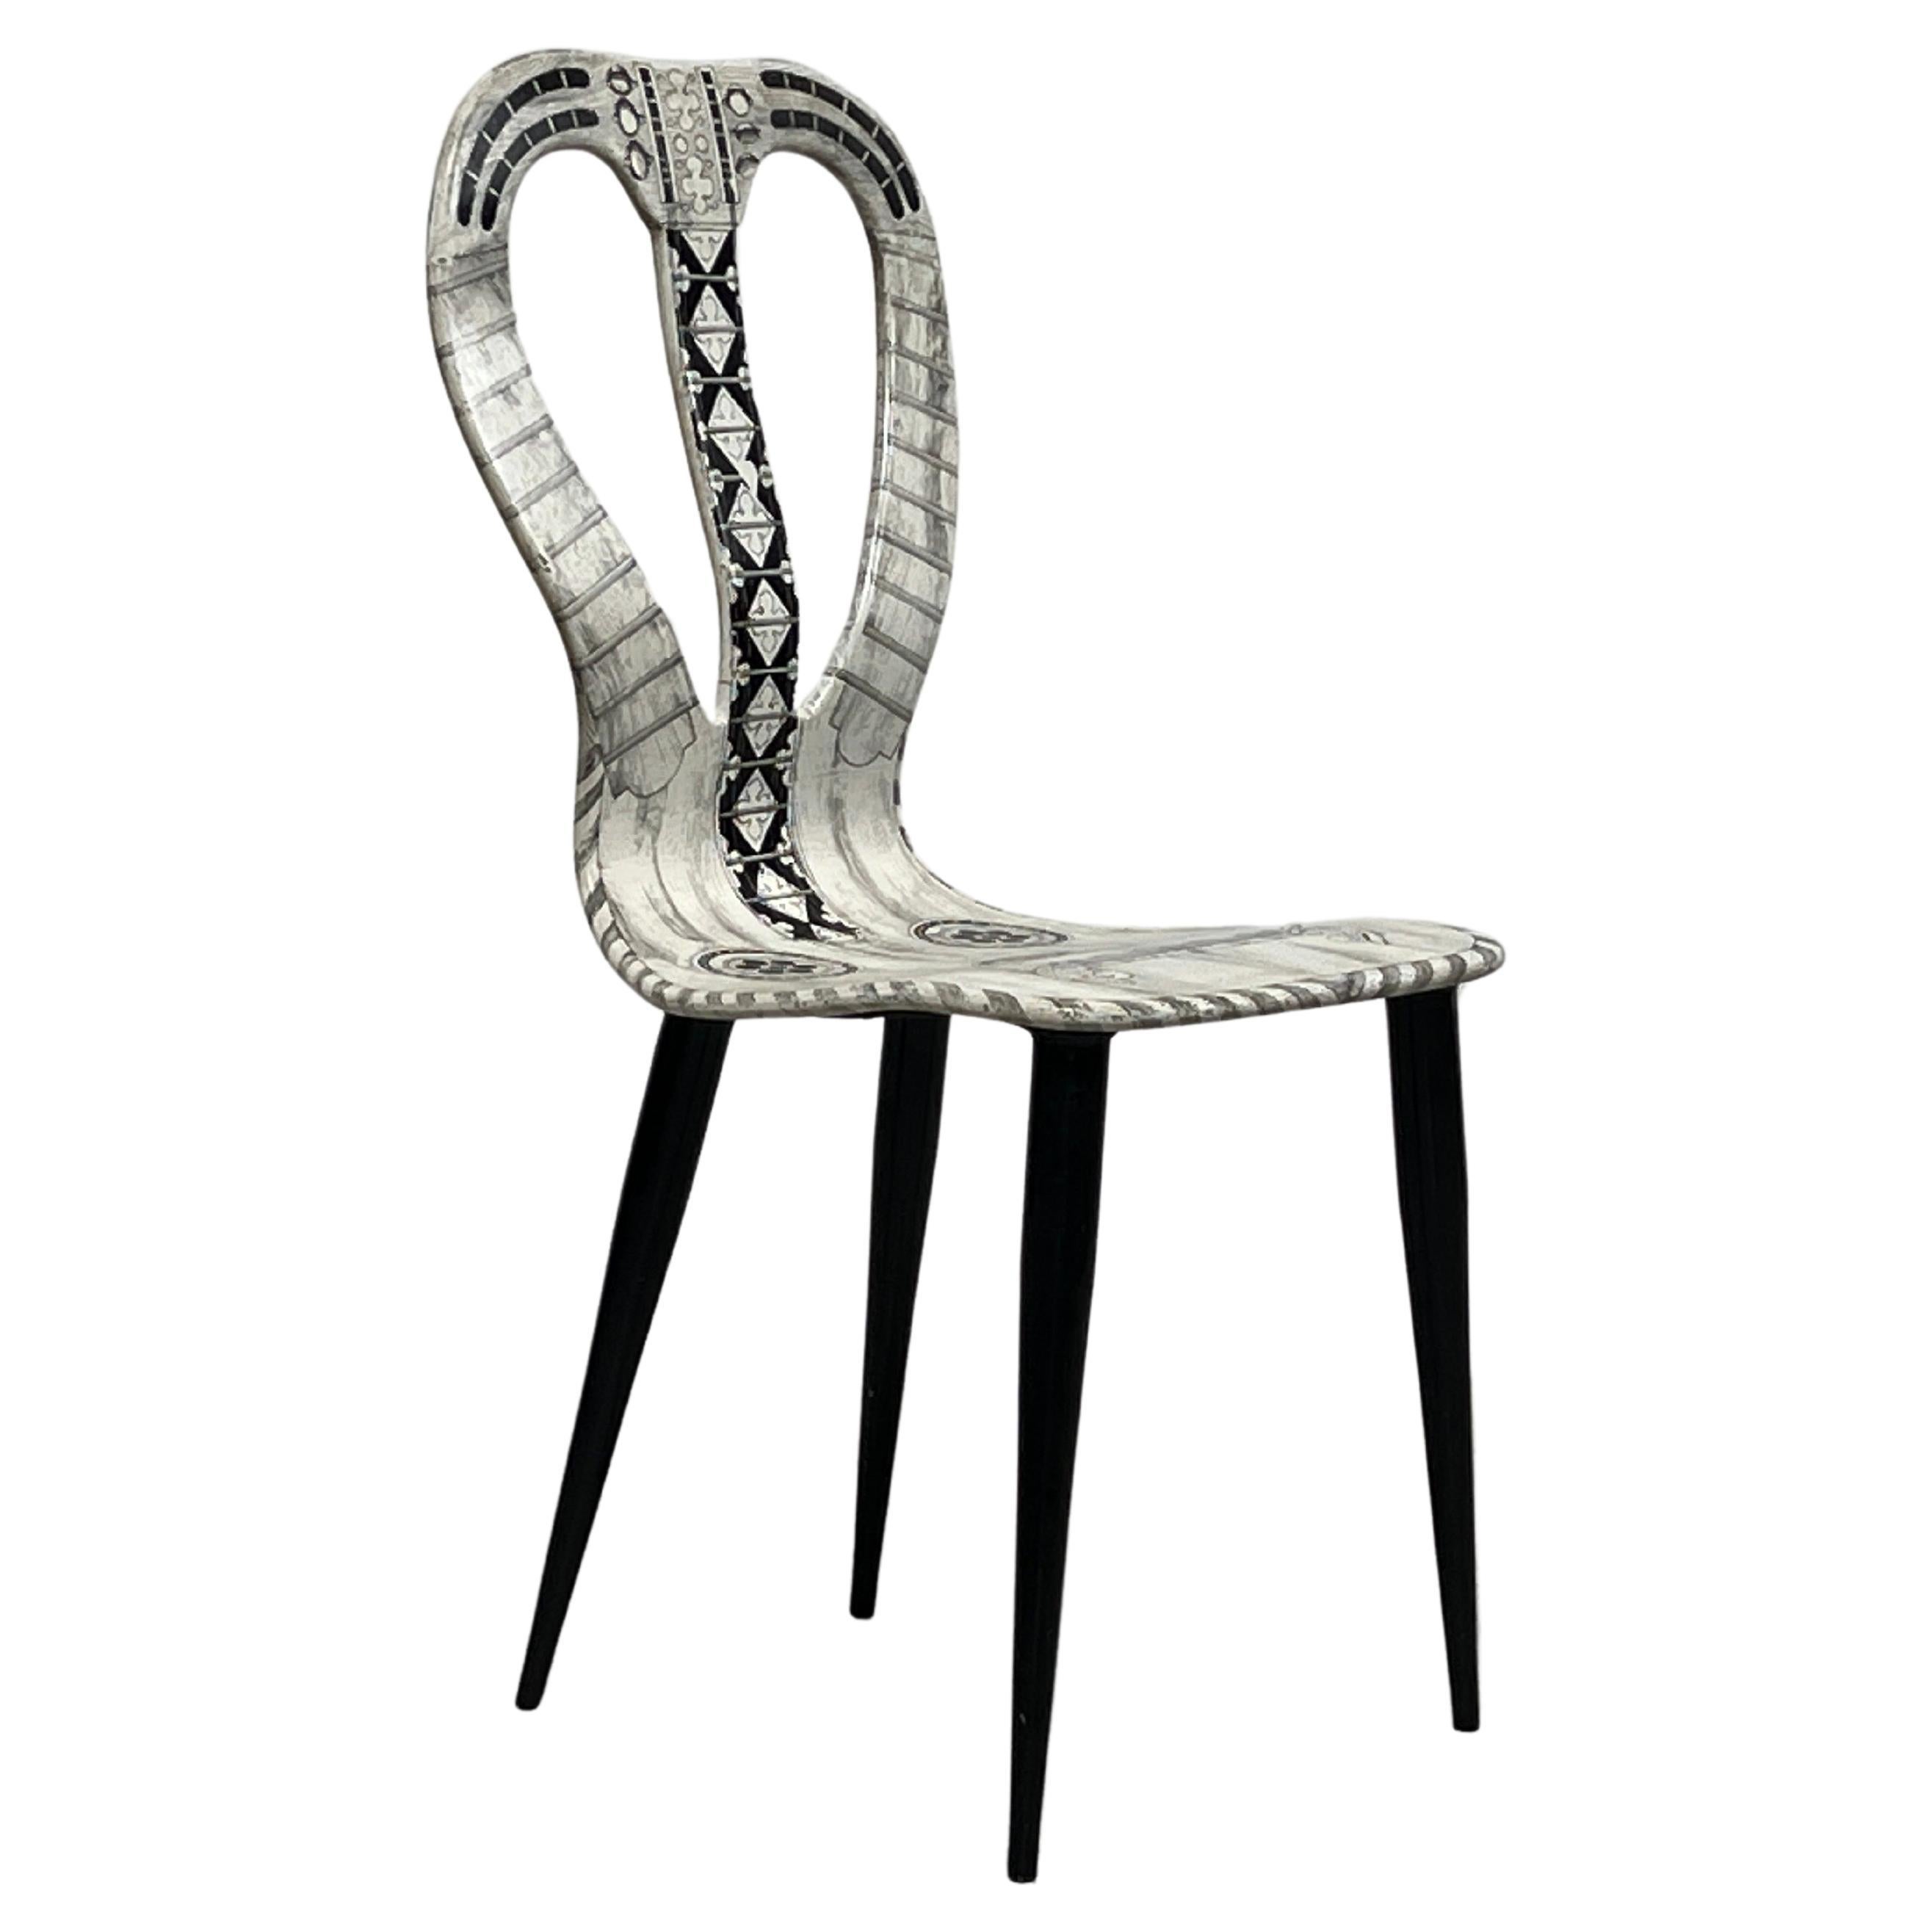 Piero Fornasetti Musicale chair For Sale